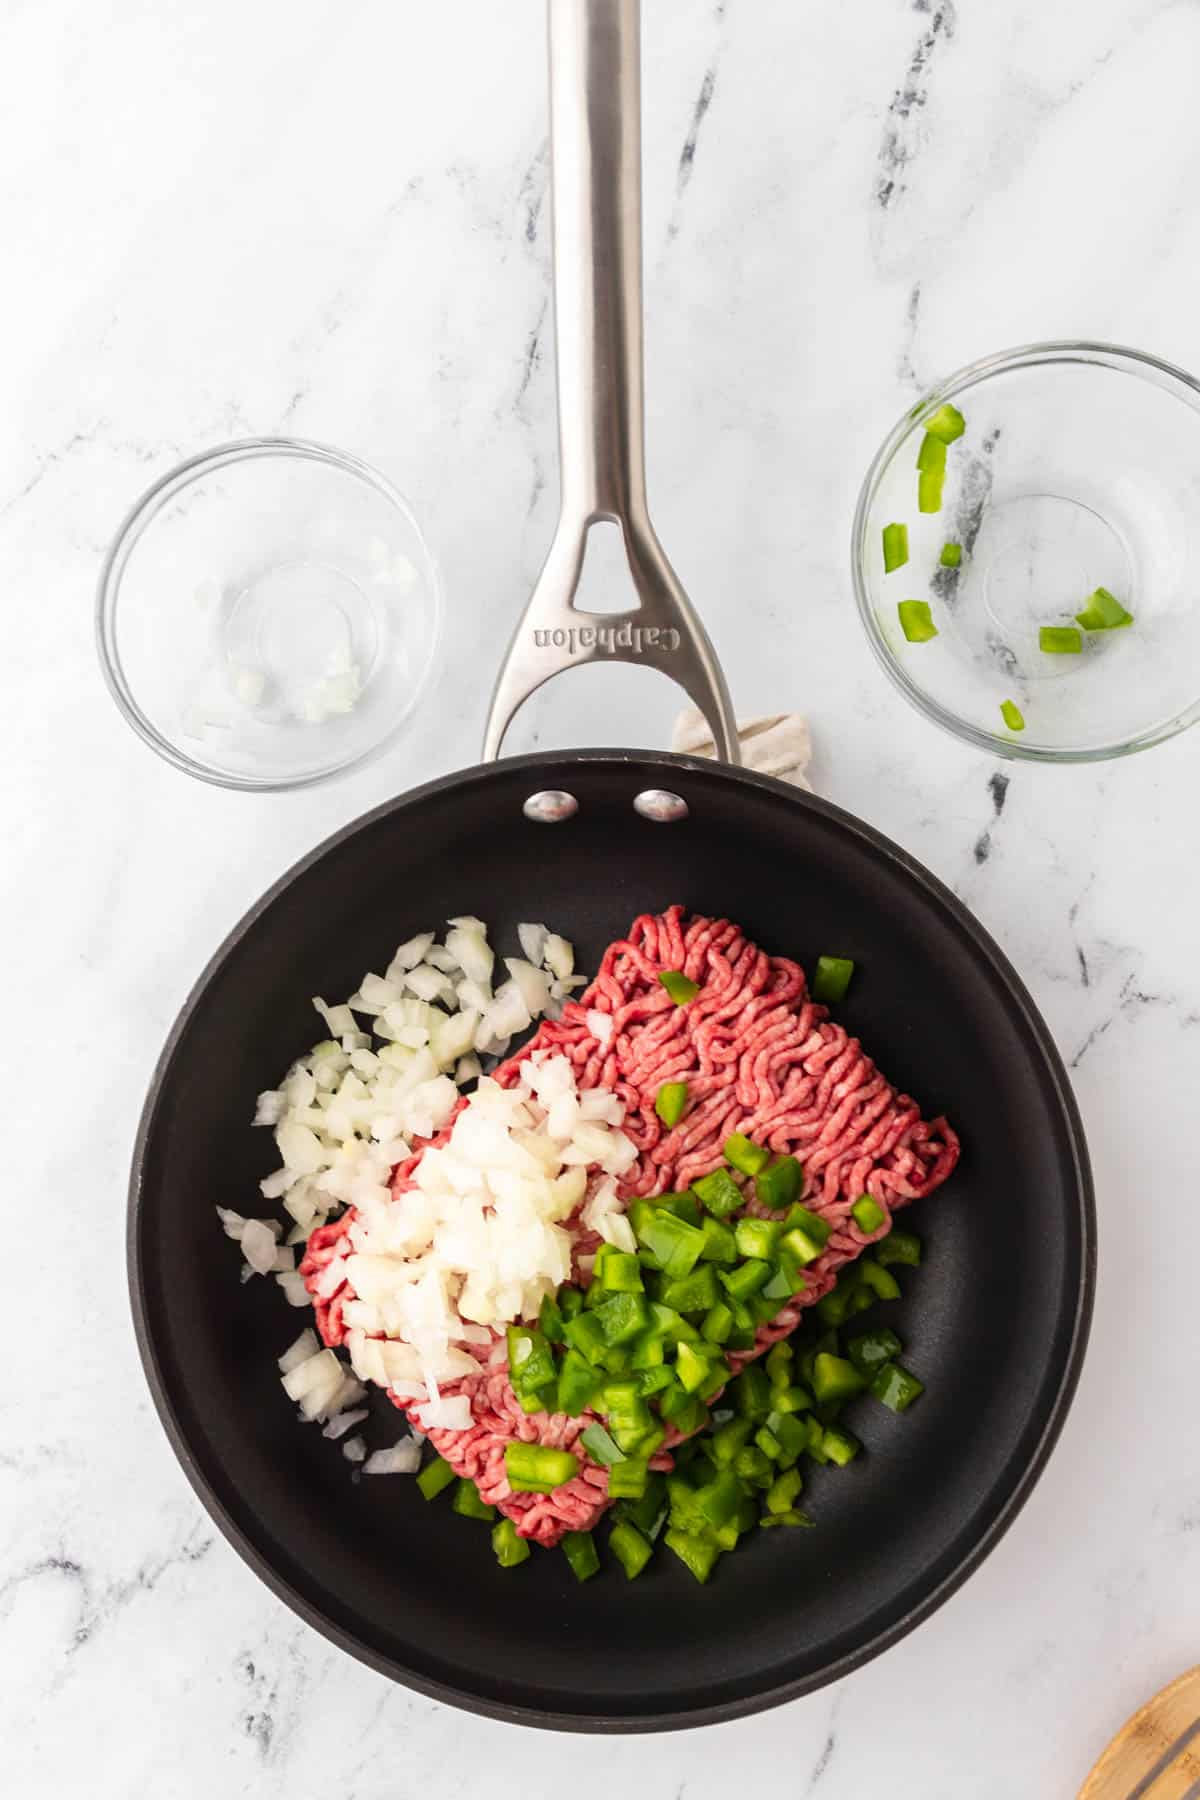 A skillet holding ground beef with finely diced onions and diced green bell peppers on top to create homemade Sloppy Joes. Empty glass bowls are displayed above the skillet. 